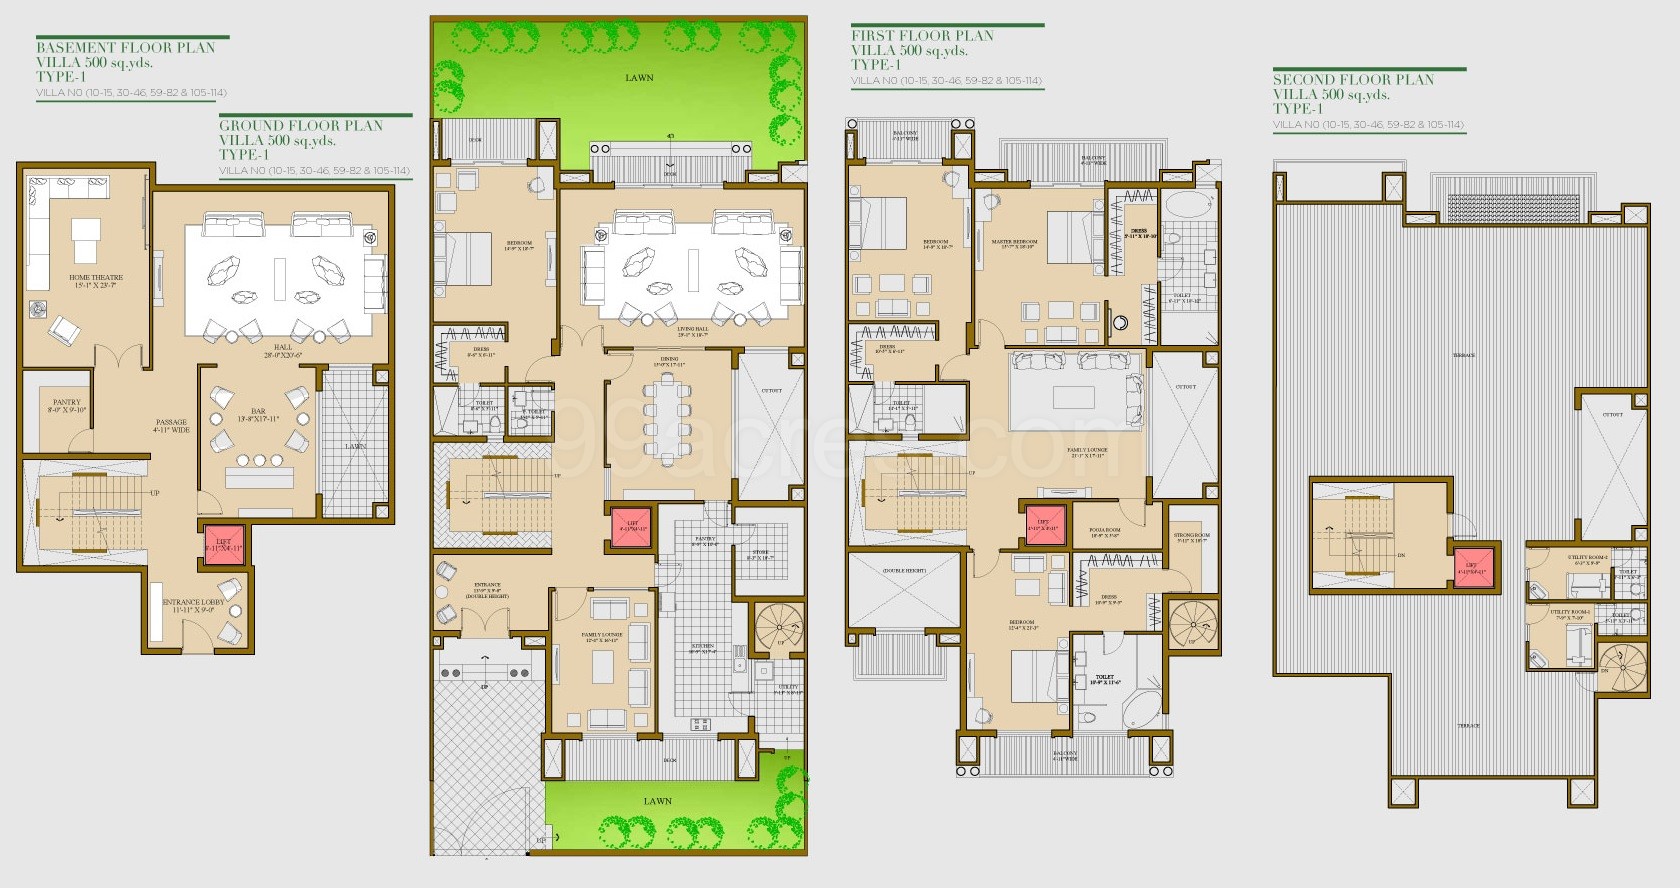 4 BHK + 6 Toilet + Living + Dining + Family Lounge + Home Theater + Servant Room (Carpet Area - 6554 Sq.ft.)